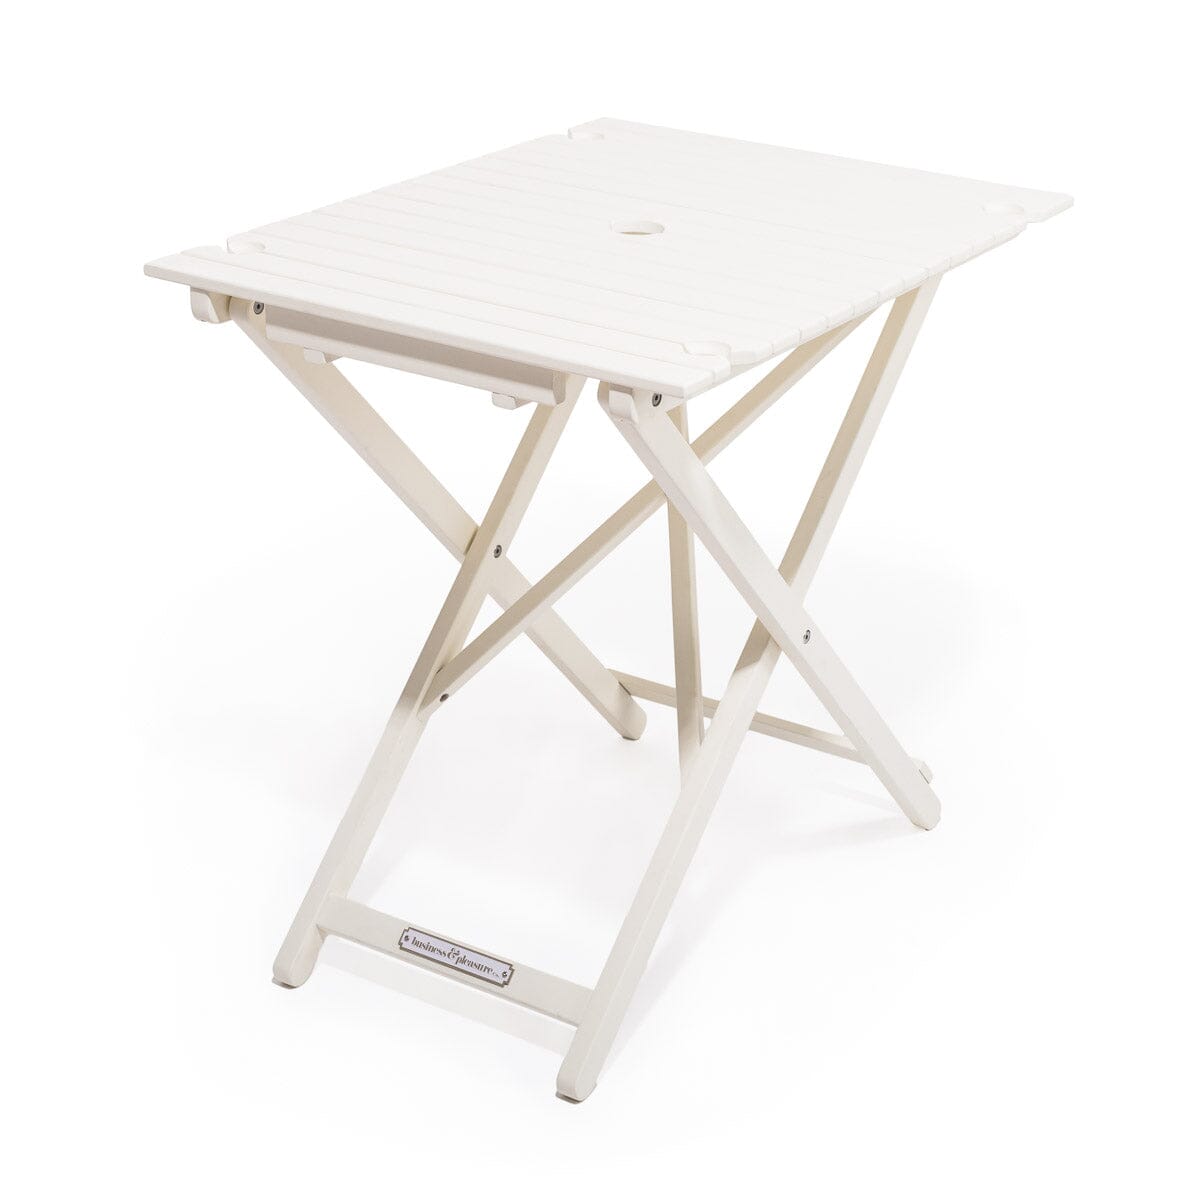 The Tall Folding Table - Antique White Tall Folding Table Business & Pleasure Co 